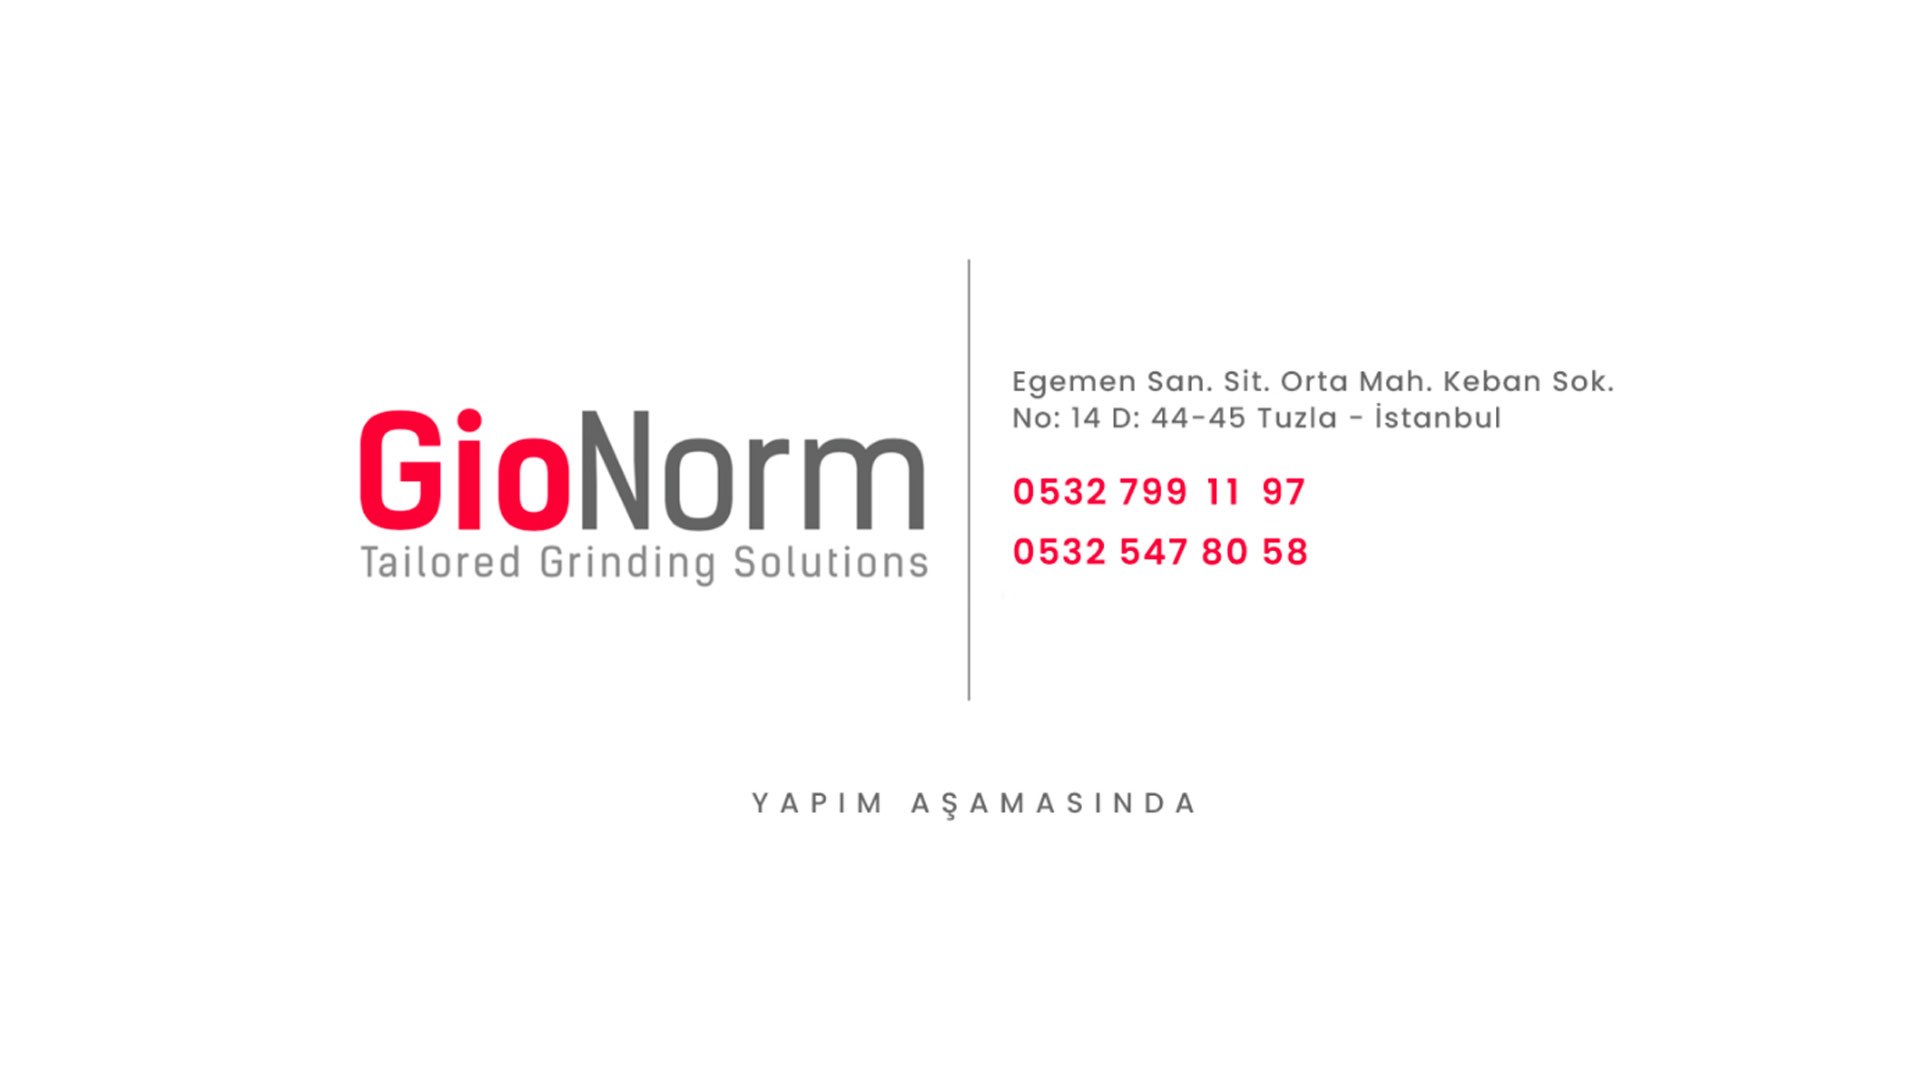 GioNorm - Tailored Grinding Solutions